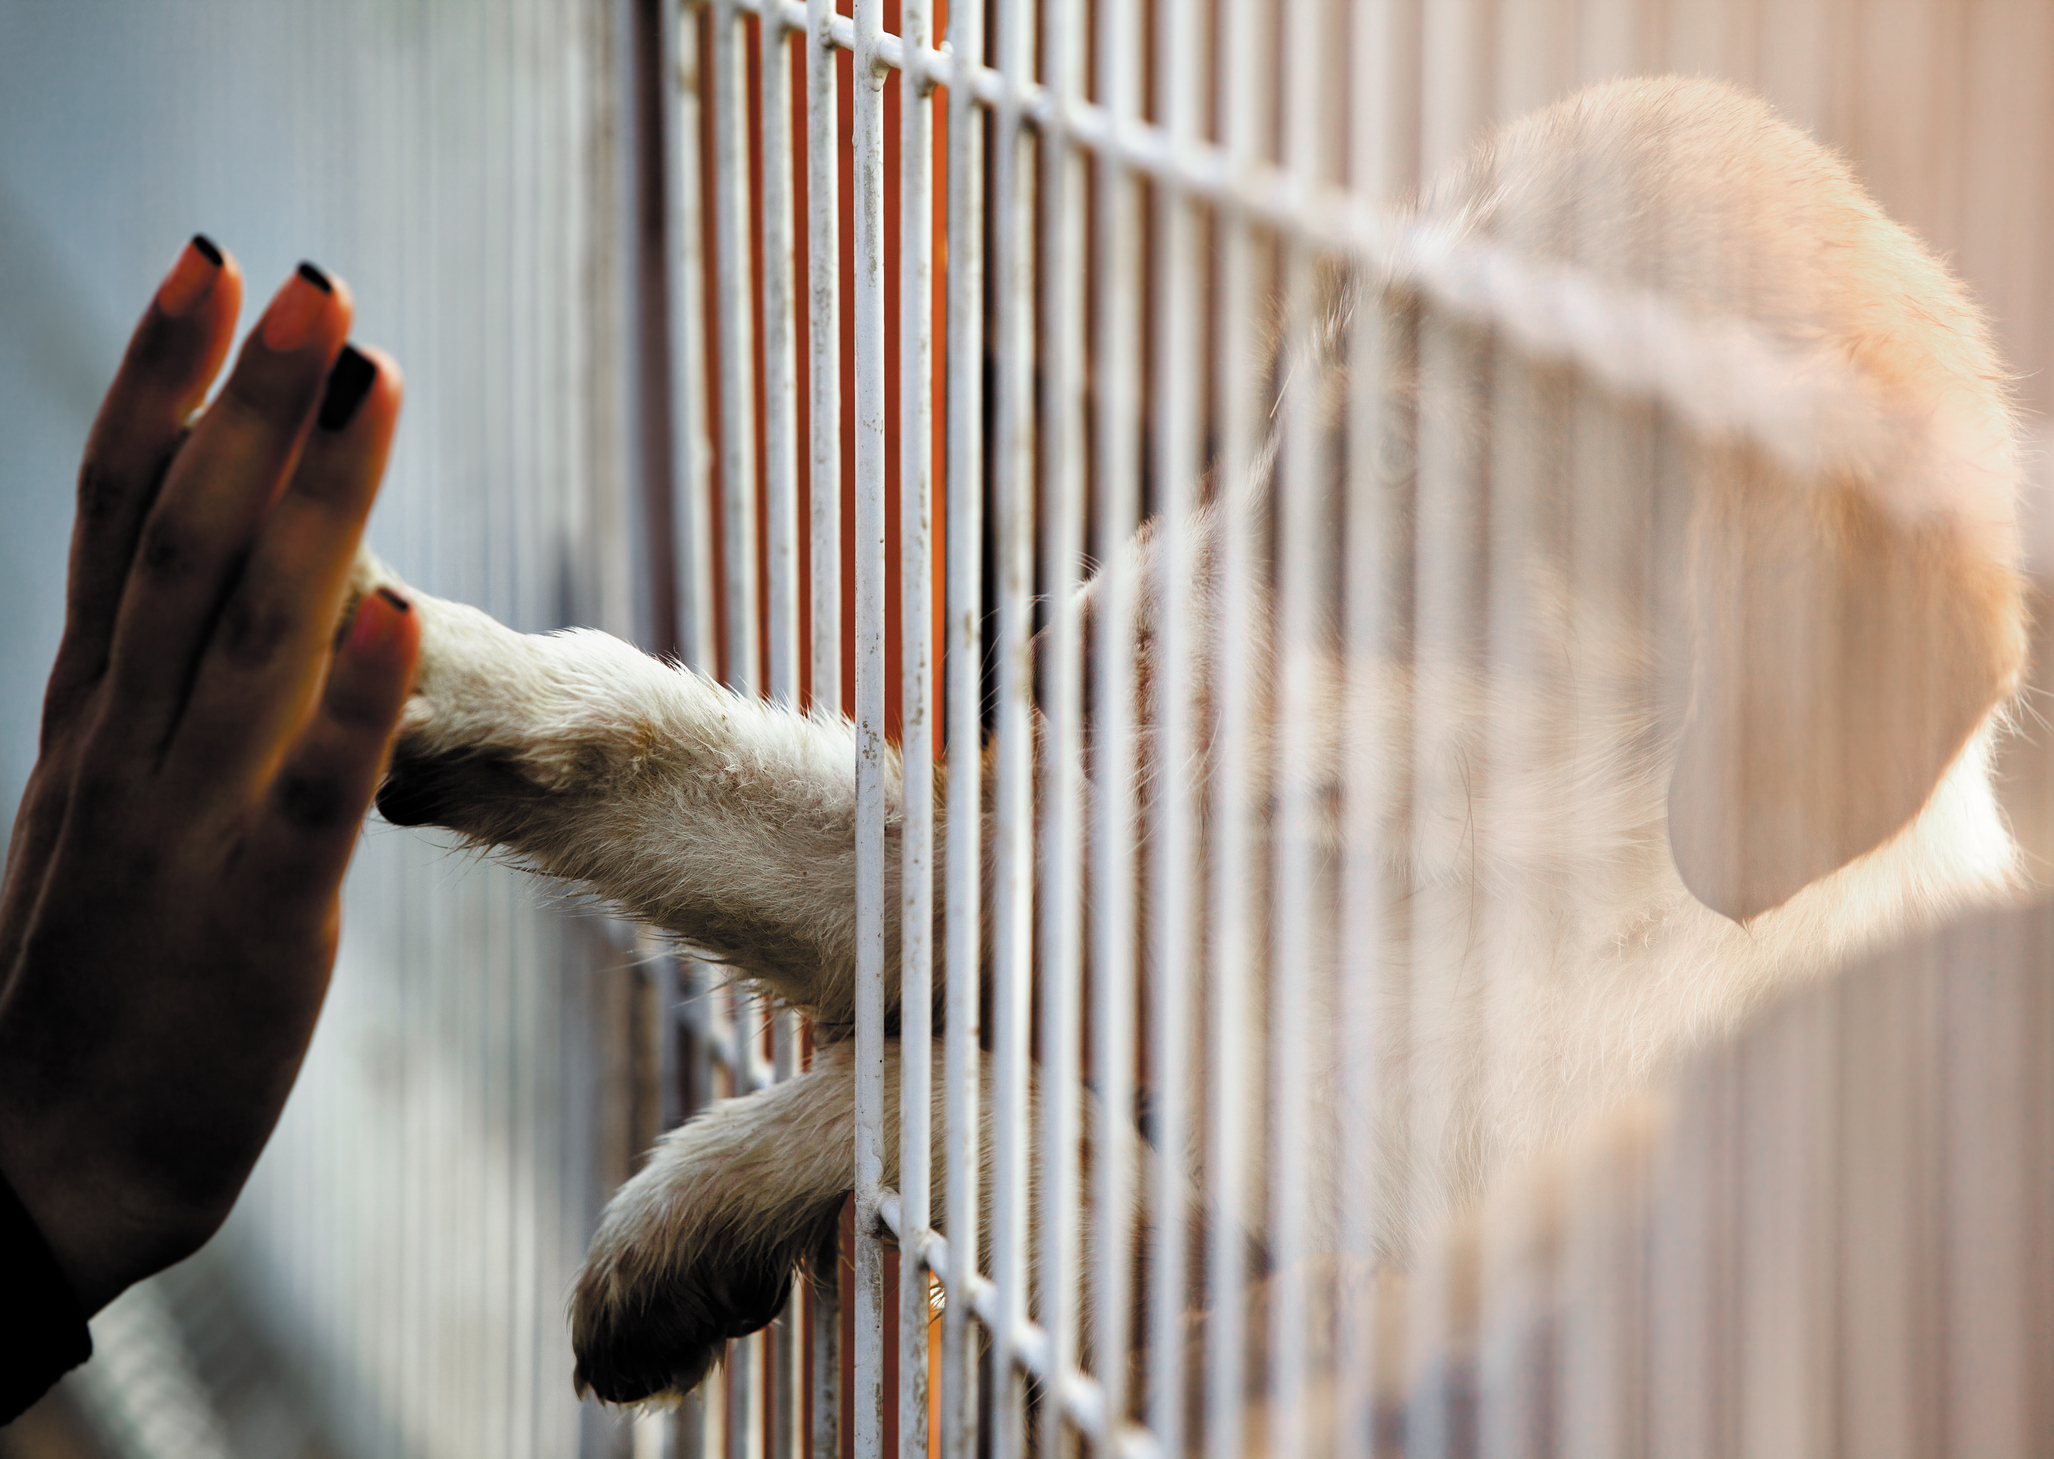 A dog reaching its paw out of a cage to touch a persons hand